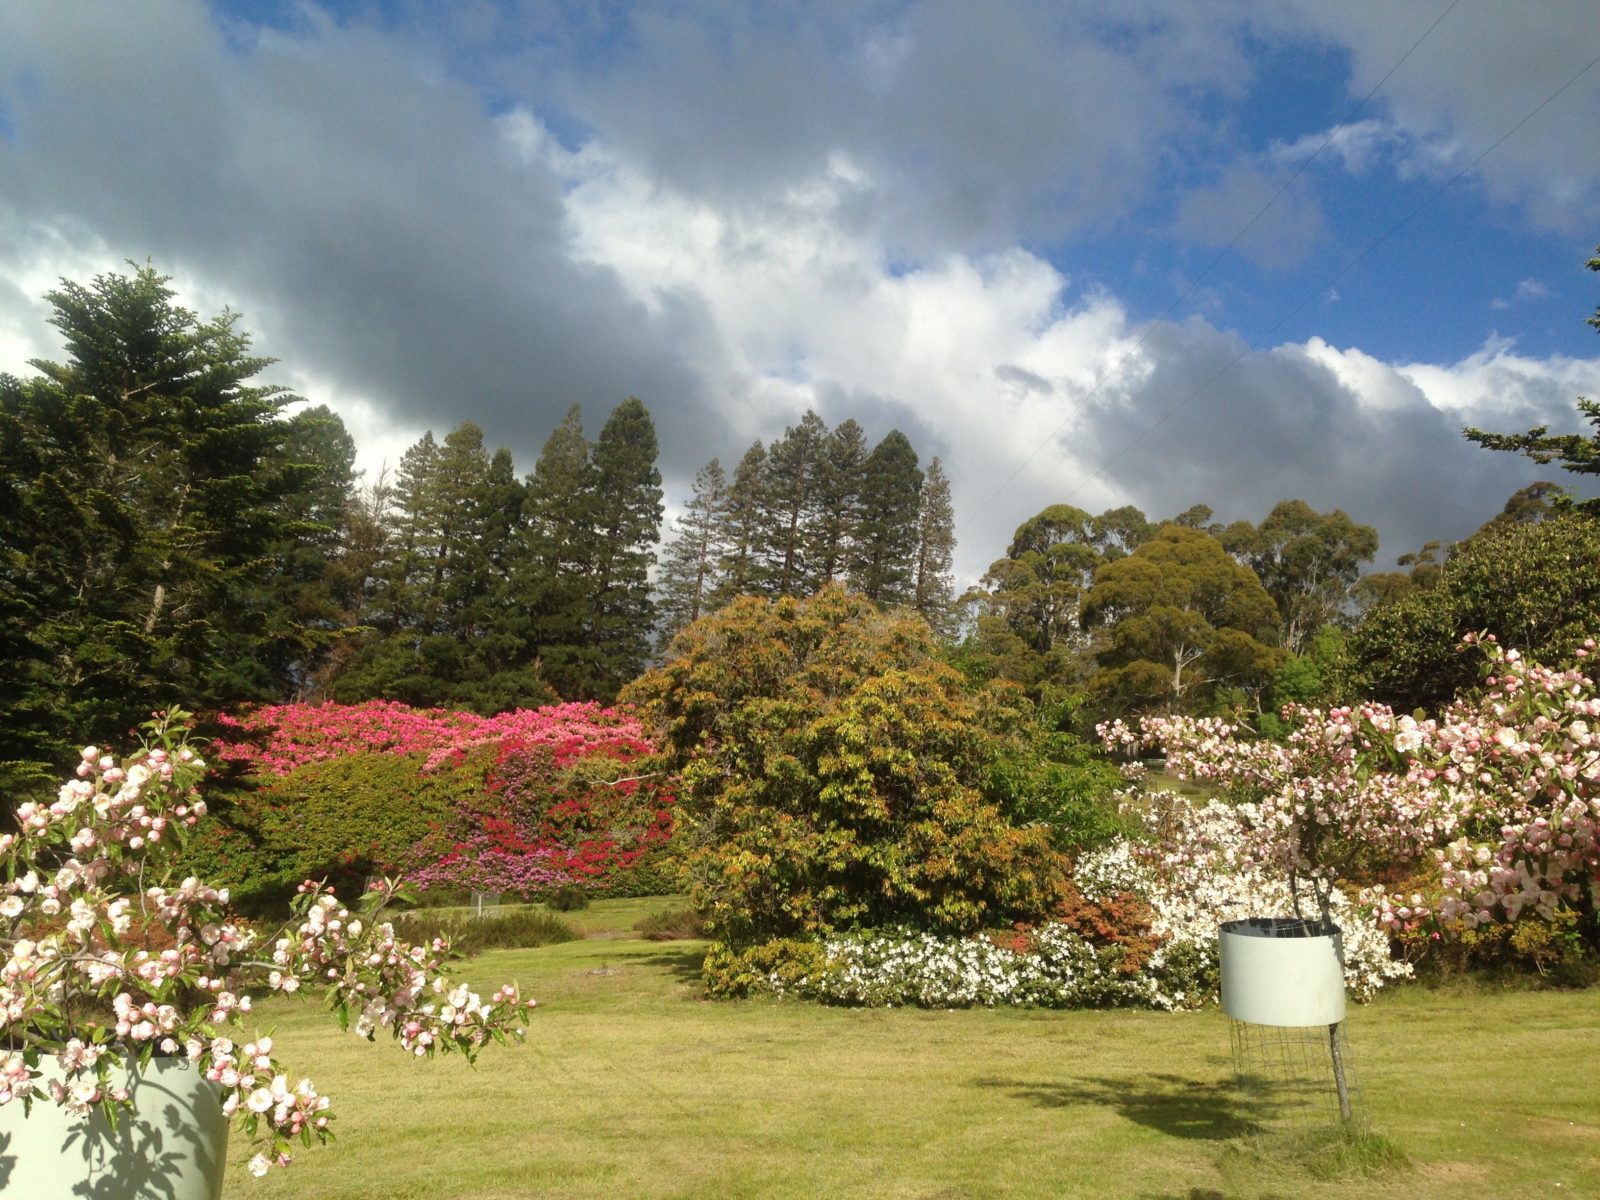 Rows of heritage rhododendrons , some 8m in height, are possibly the oldest and largest in Australia